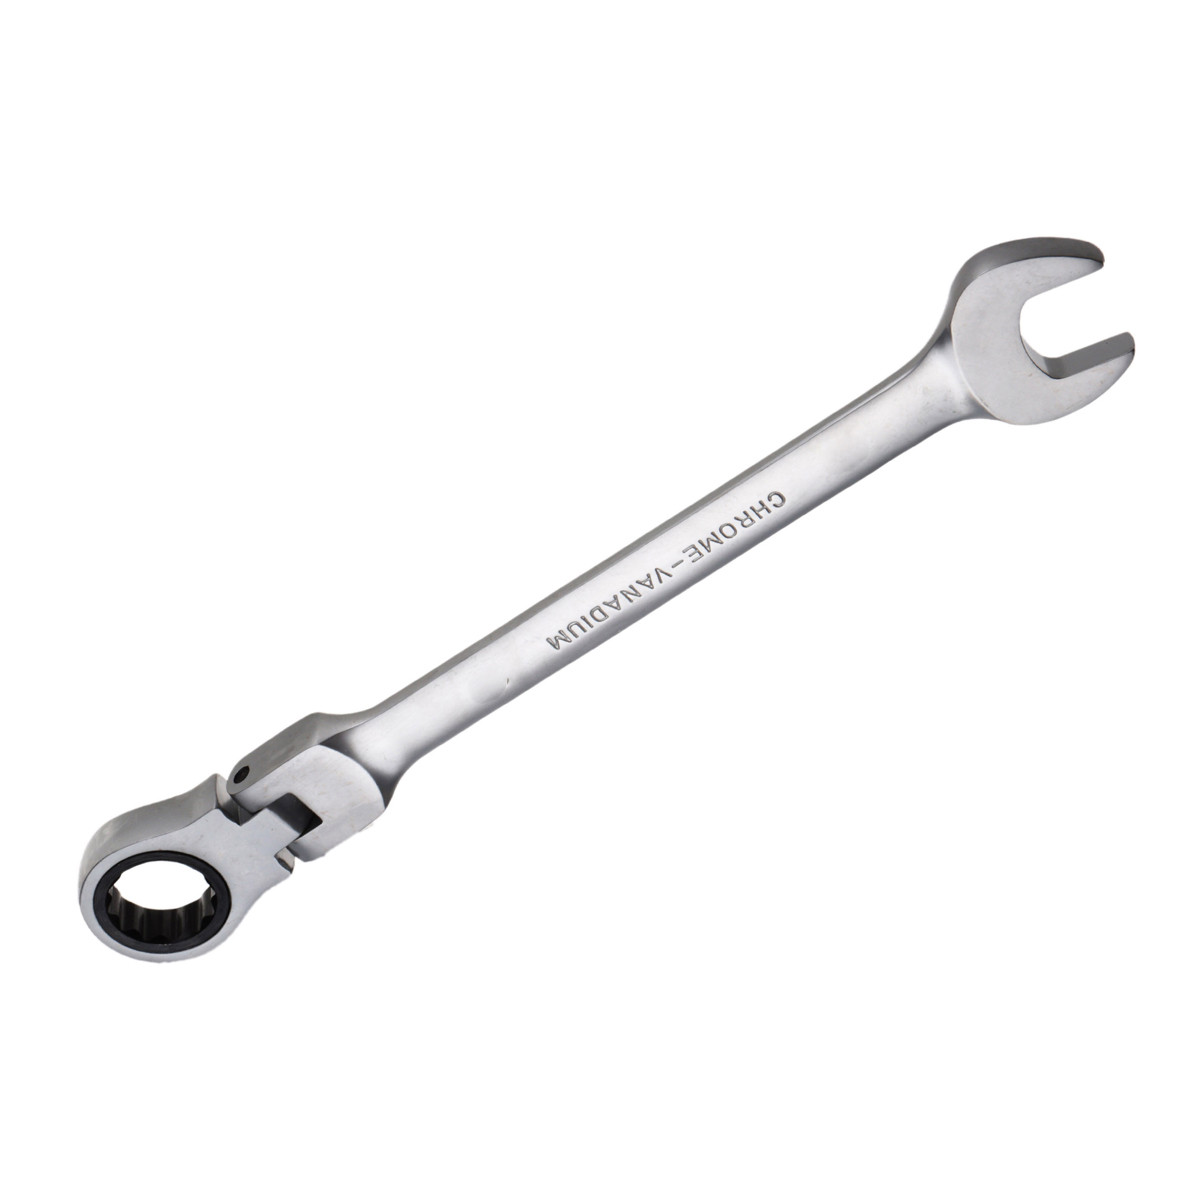 

24 mm CR-V Steel Flexible Head Ratchet Wrench Metric Spanner Open End & Ring Wrenches Tool